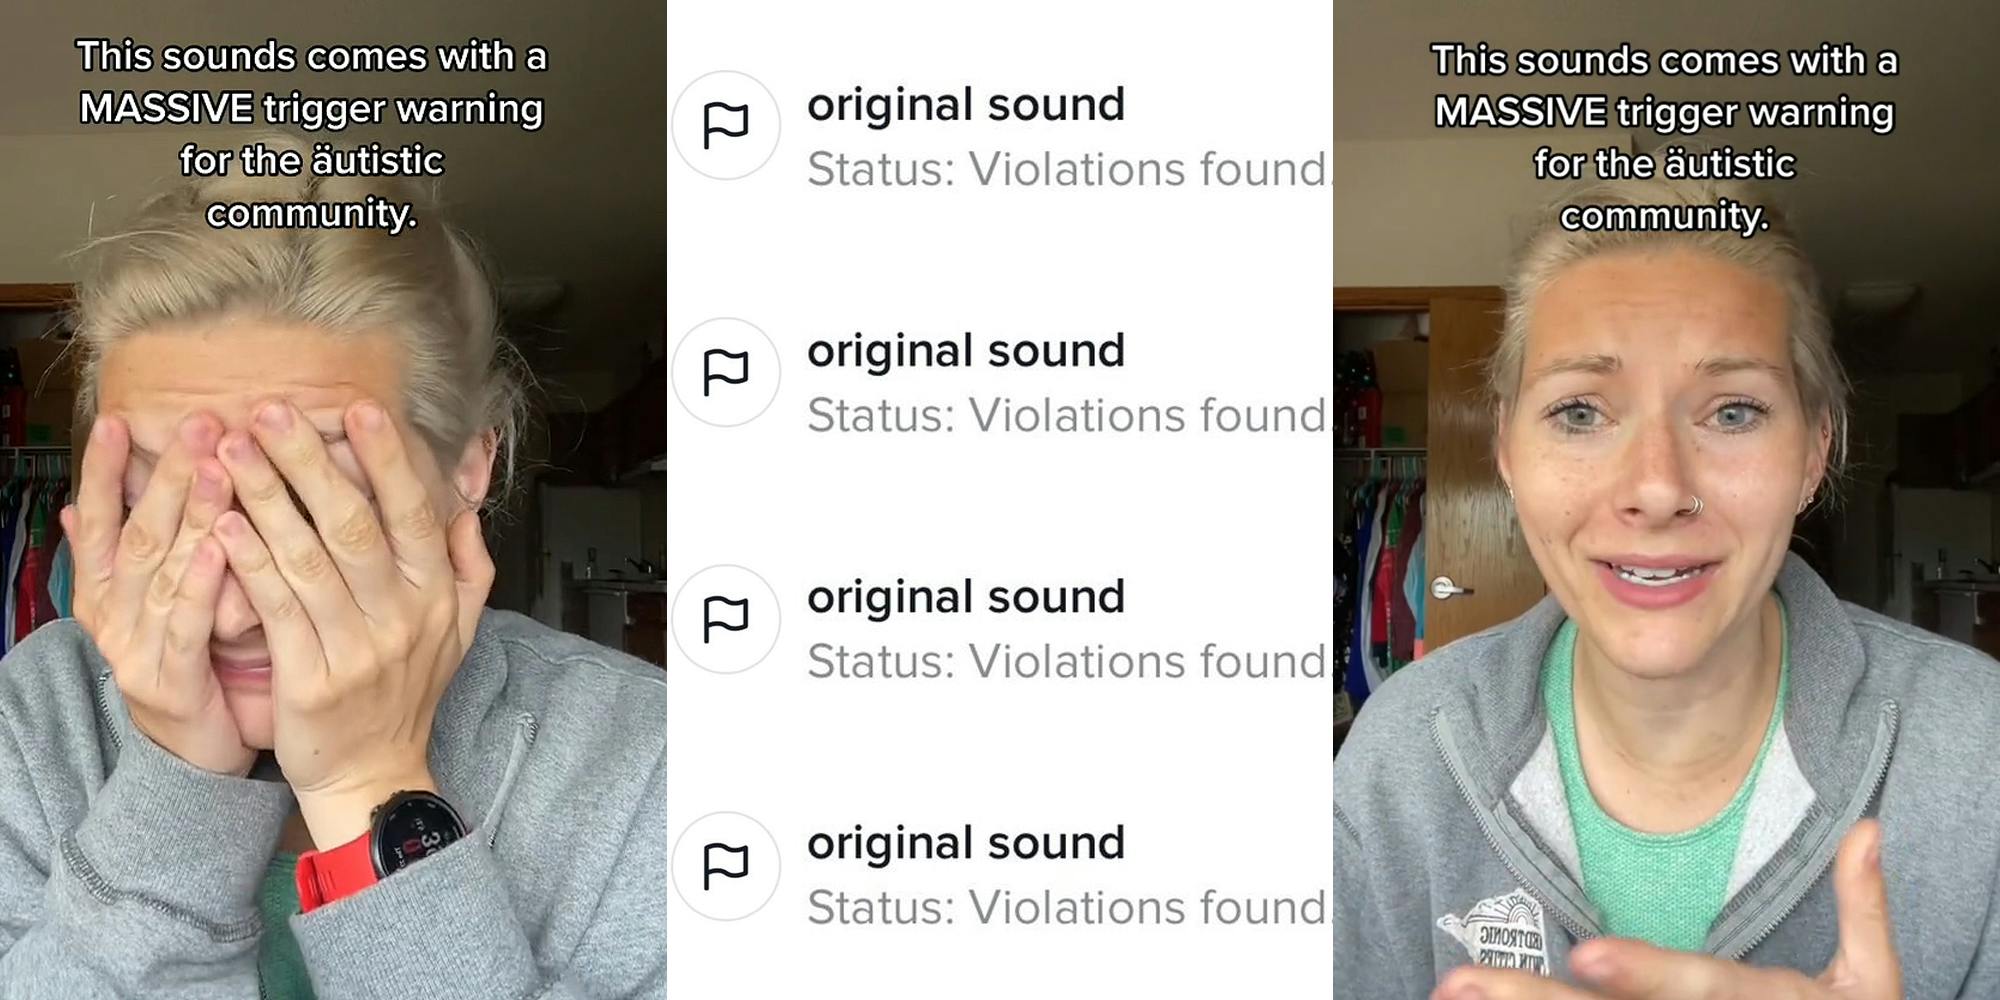 Autistic TikToker Reports Offensive Sound 4 times—It's Still Up